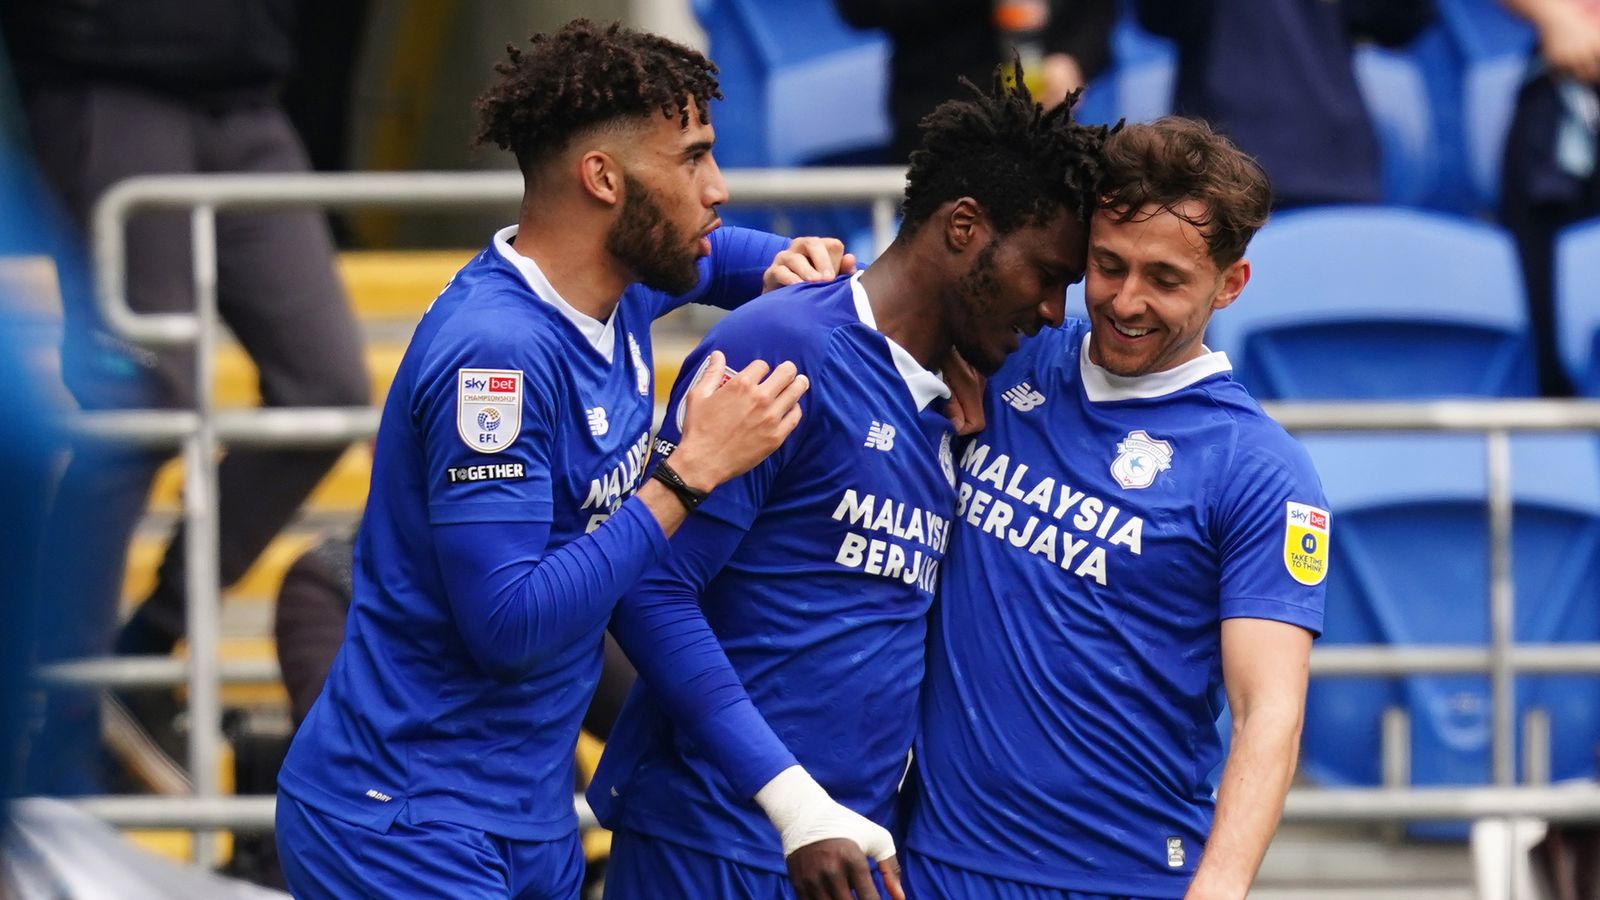 Cardiff City FC - News, Transfers, Fixtures & Results